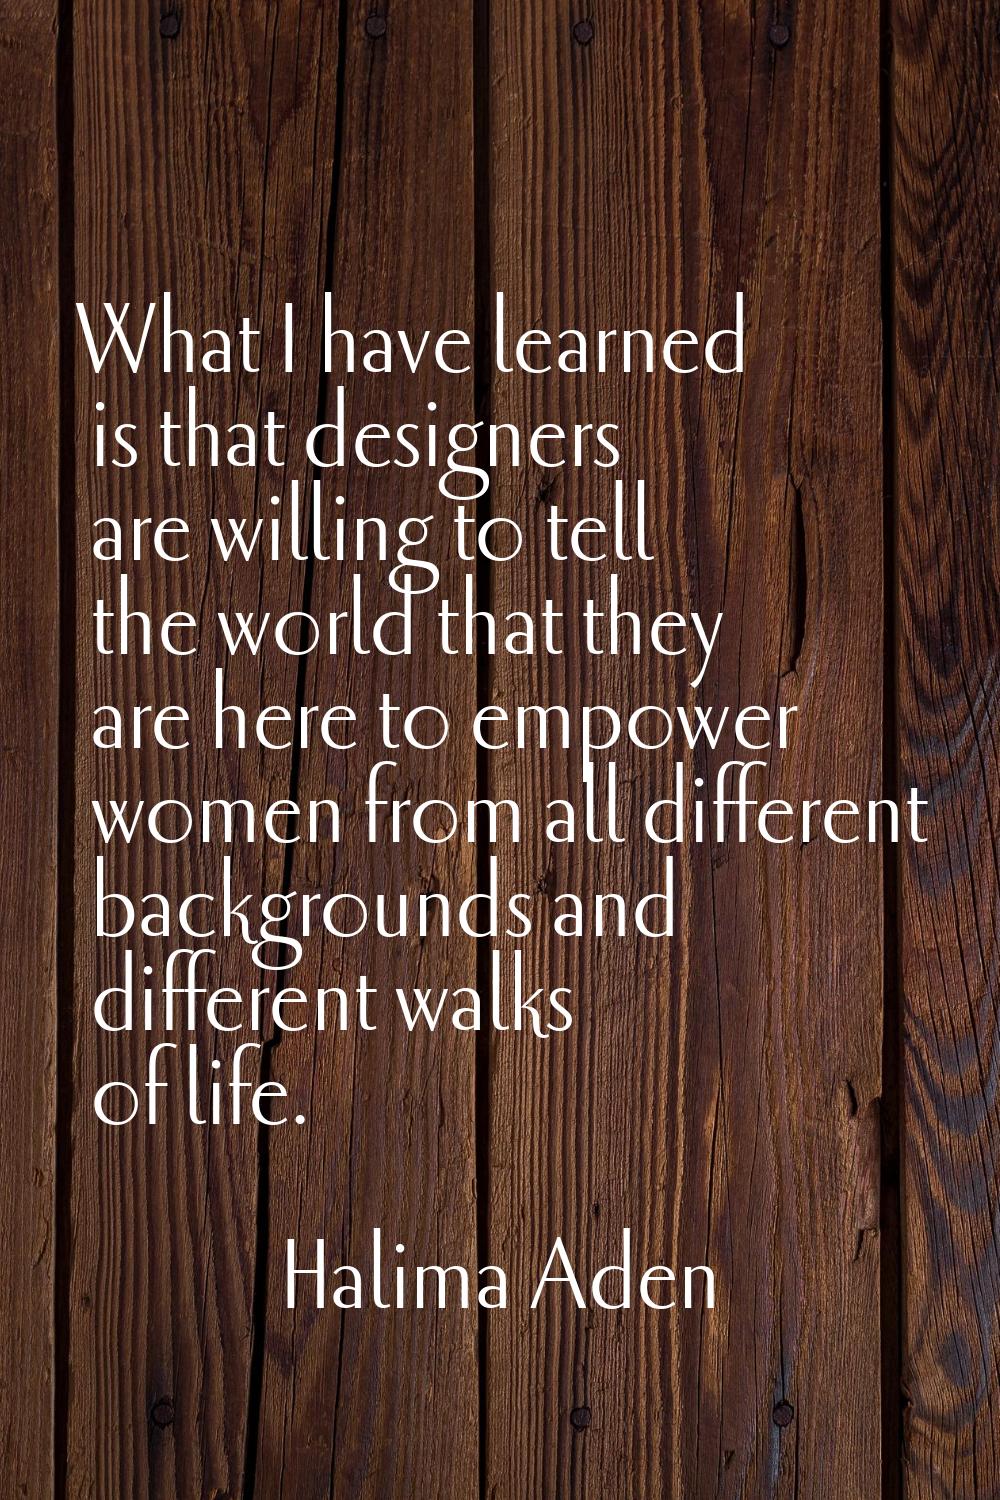 What I have learned is that designers are willing to tell the world that they are here to empower w